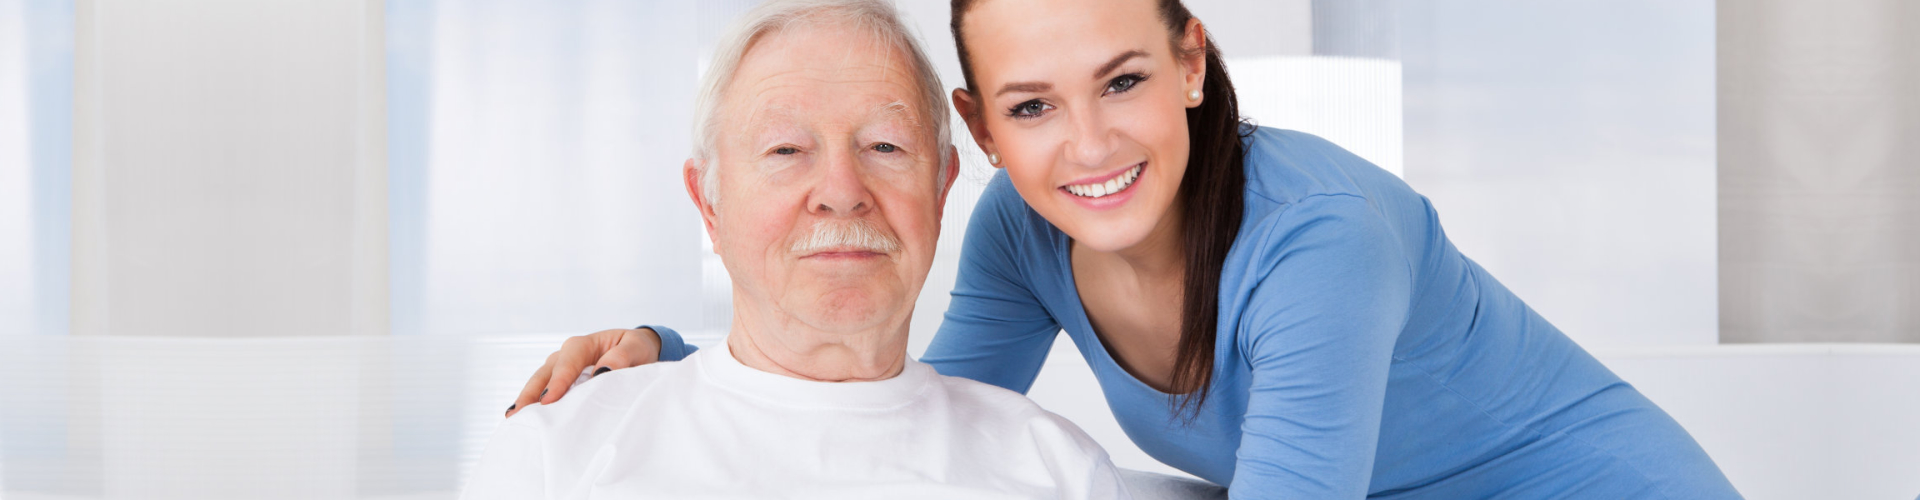 sitting elderly man with a middle aged woman